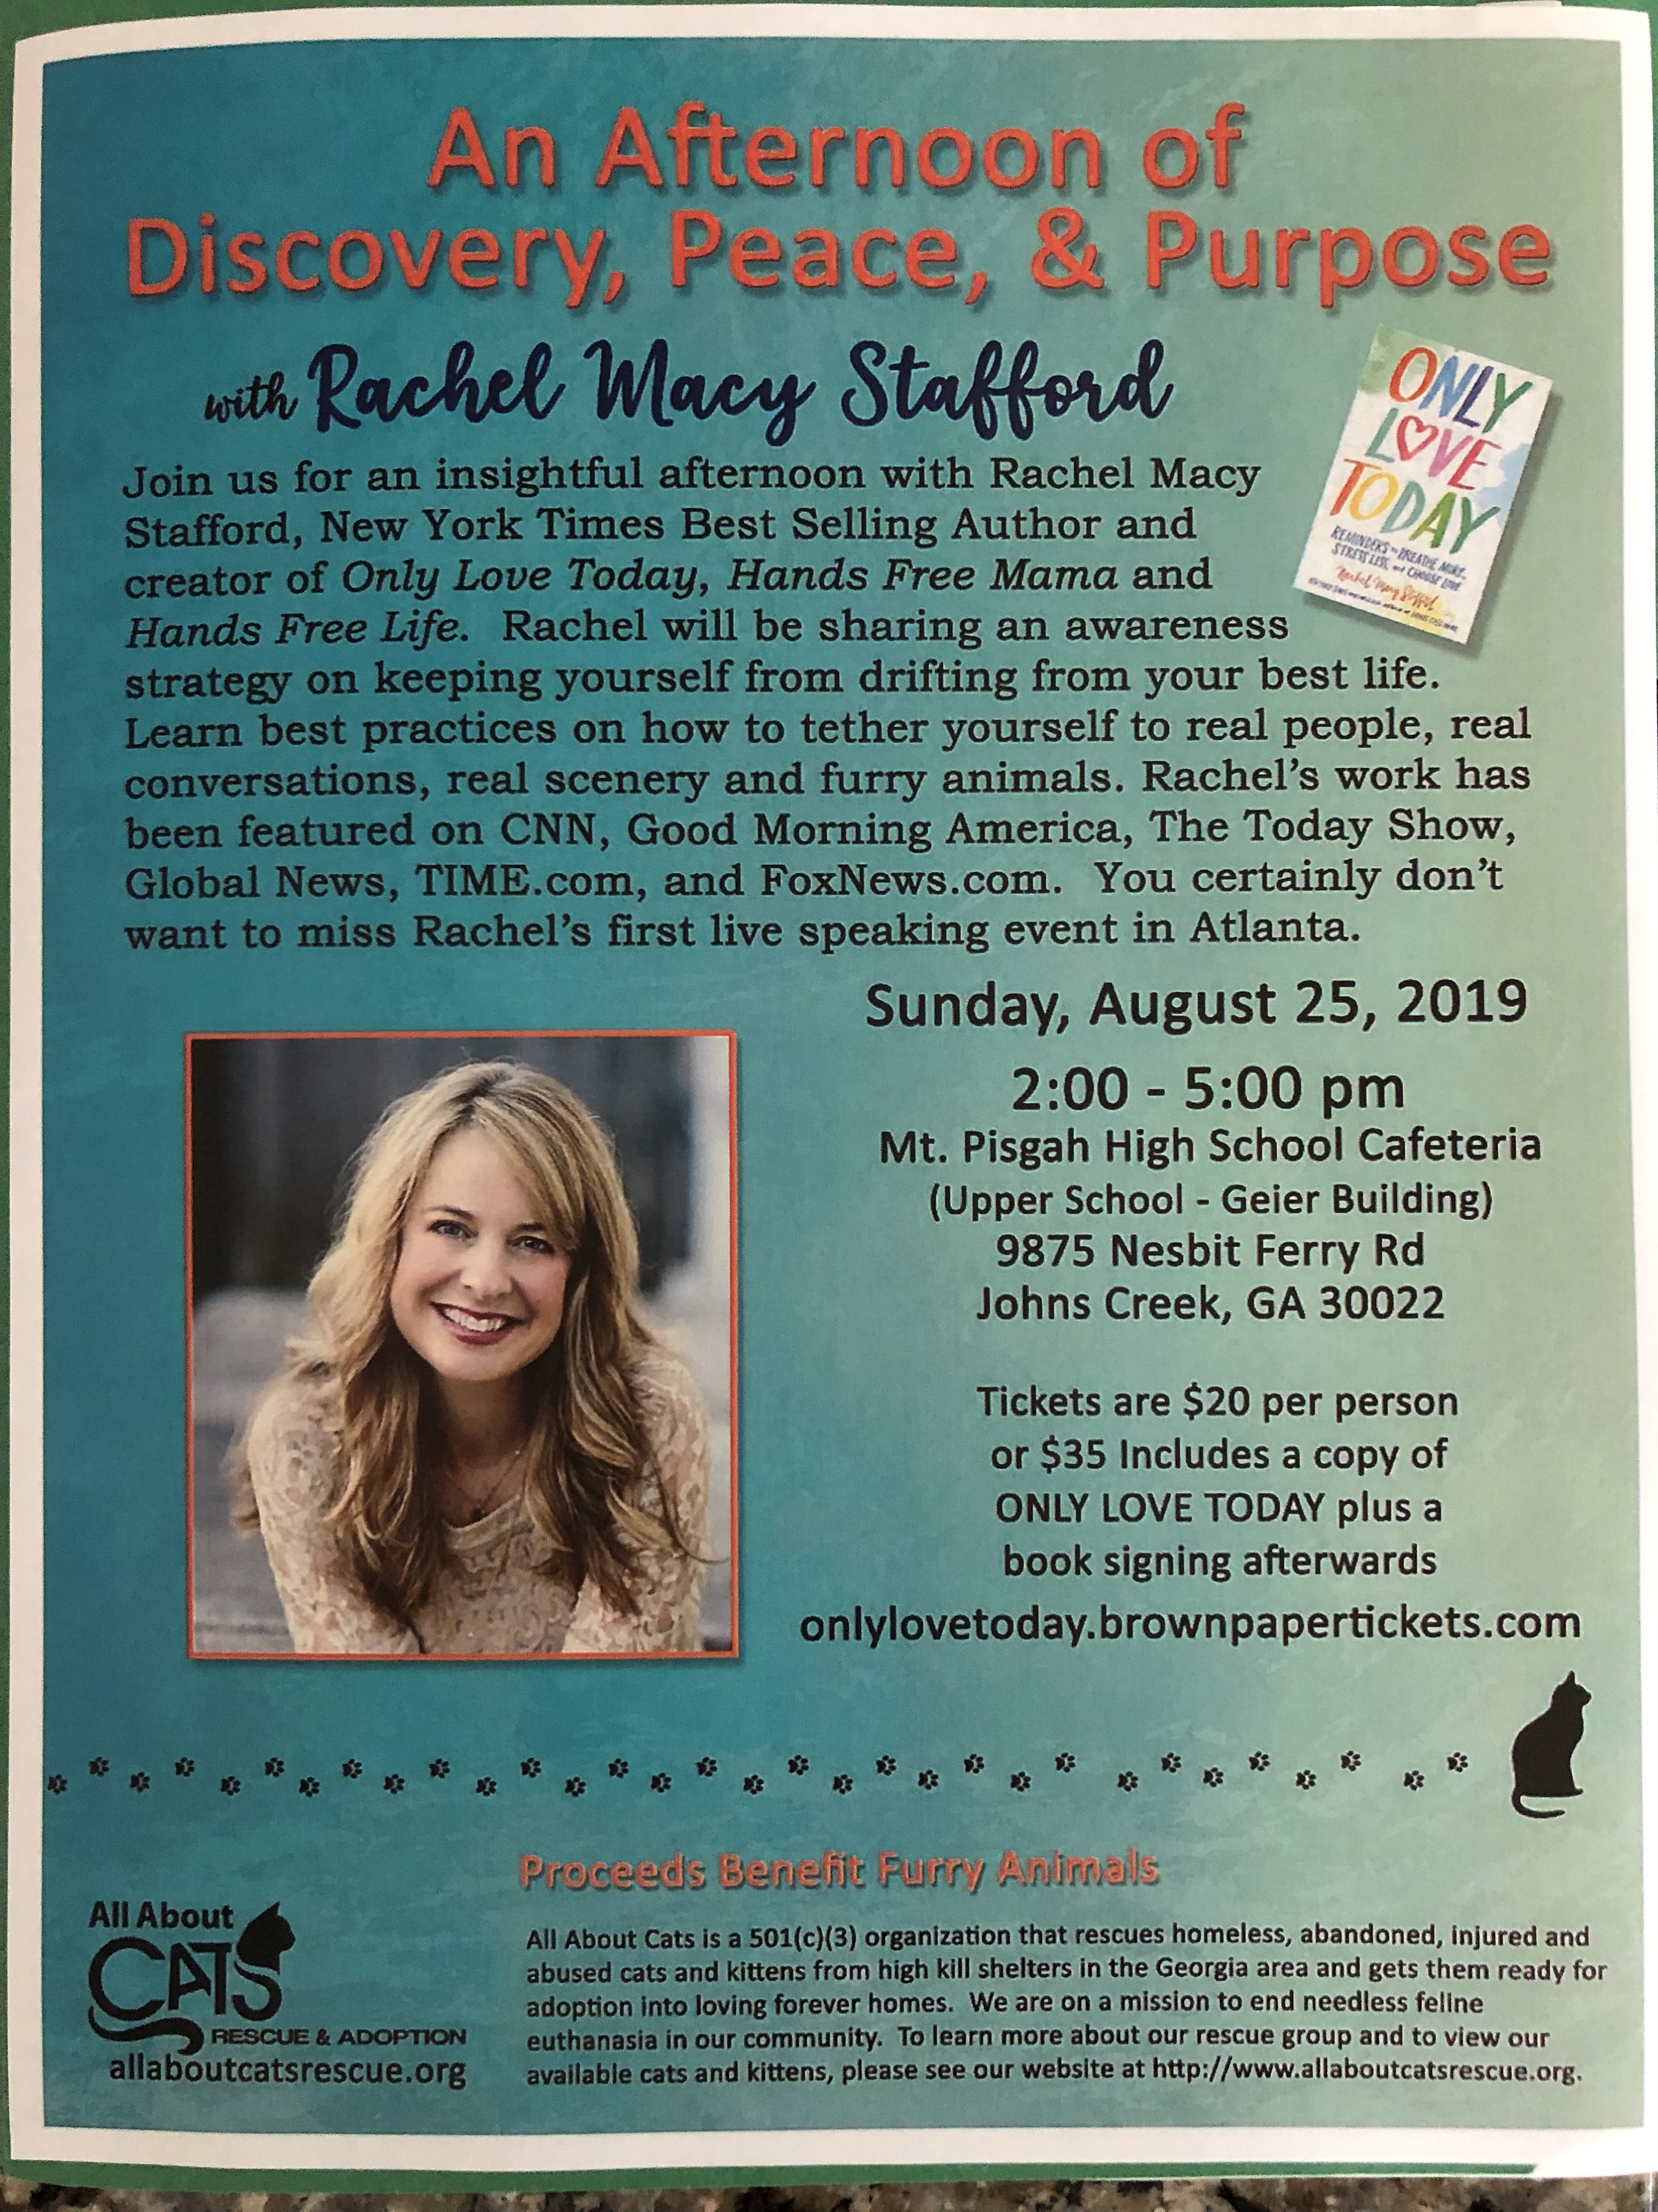 An Afternoon of Discovery, Peace & Purpose with Rachel Macy Stafford